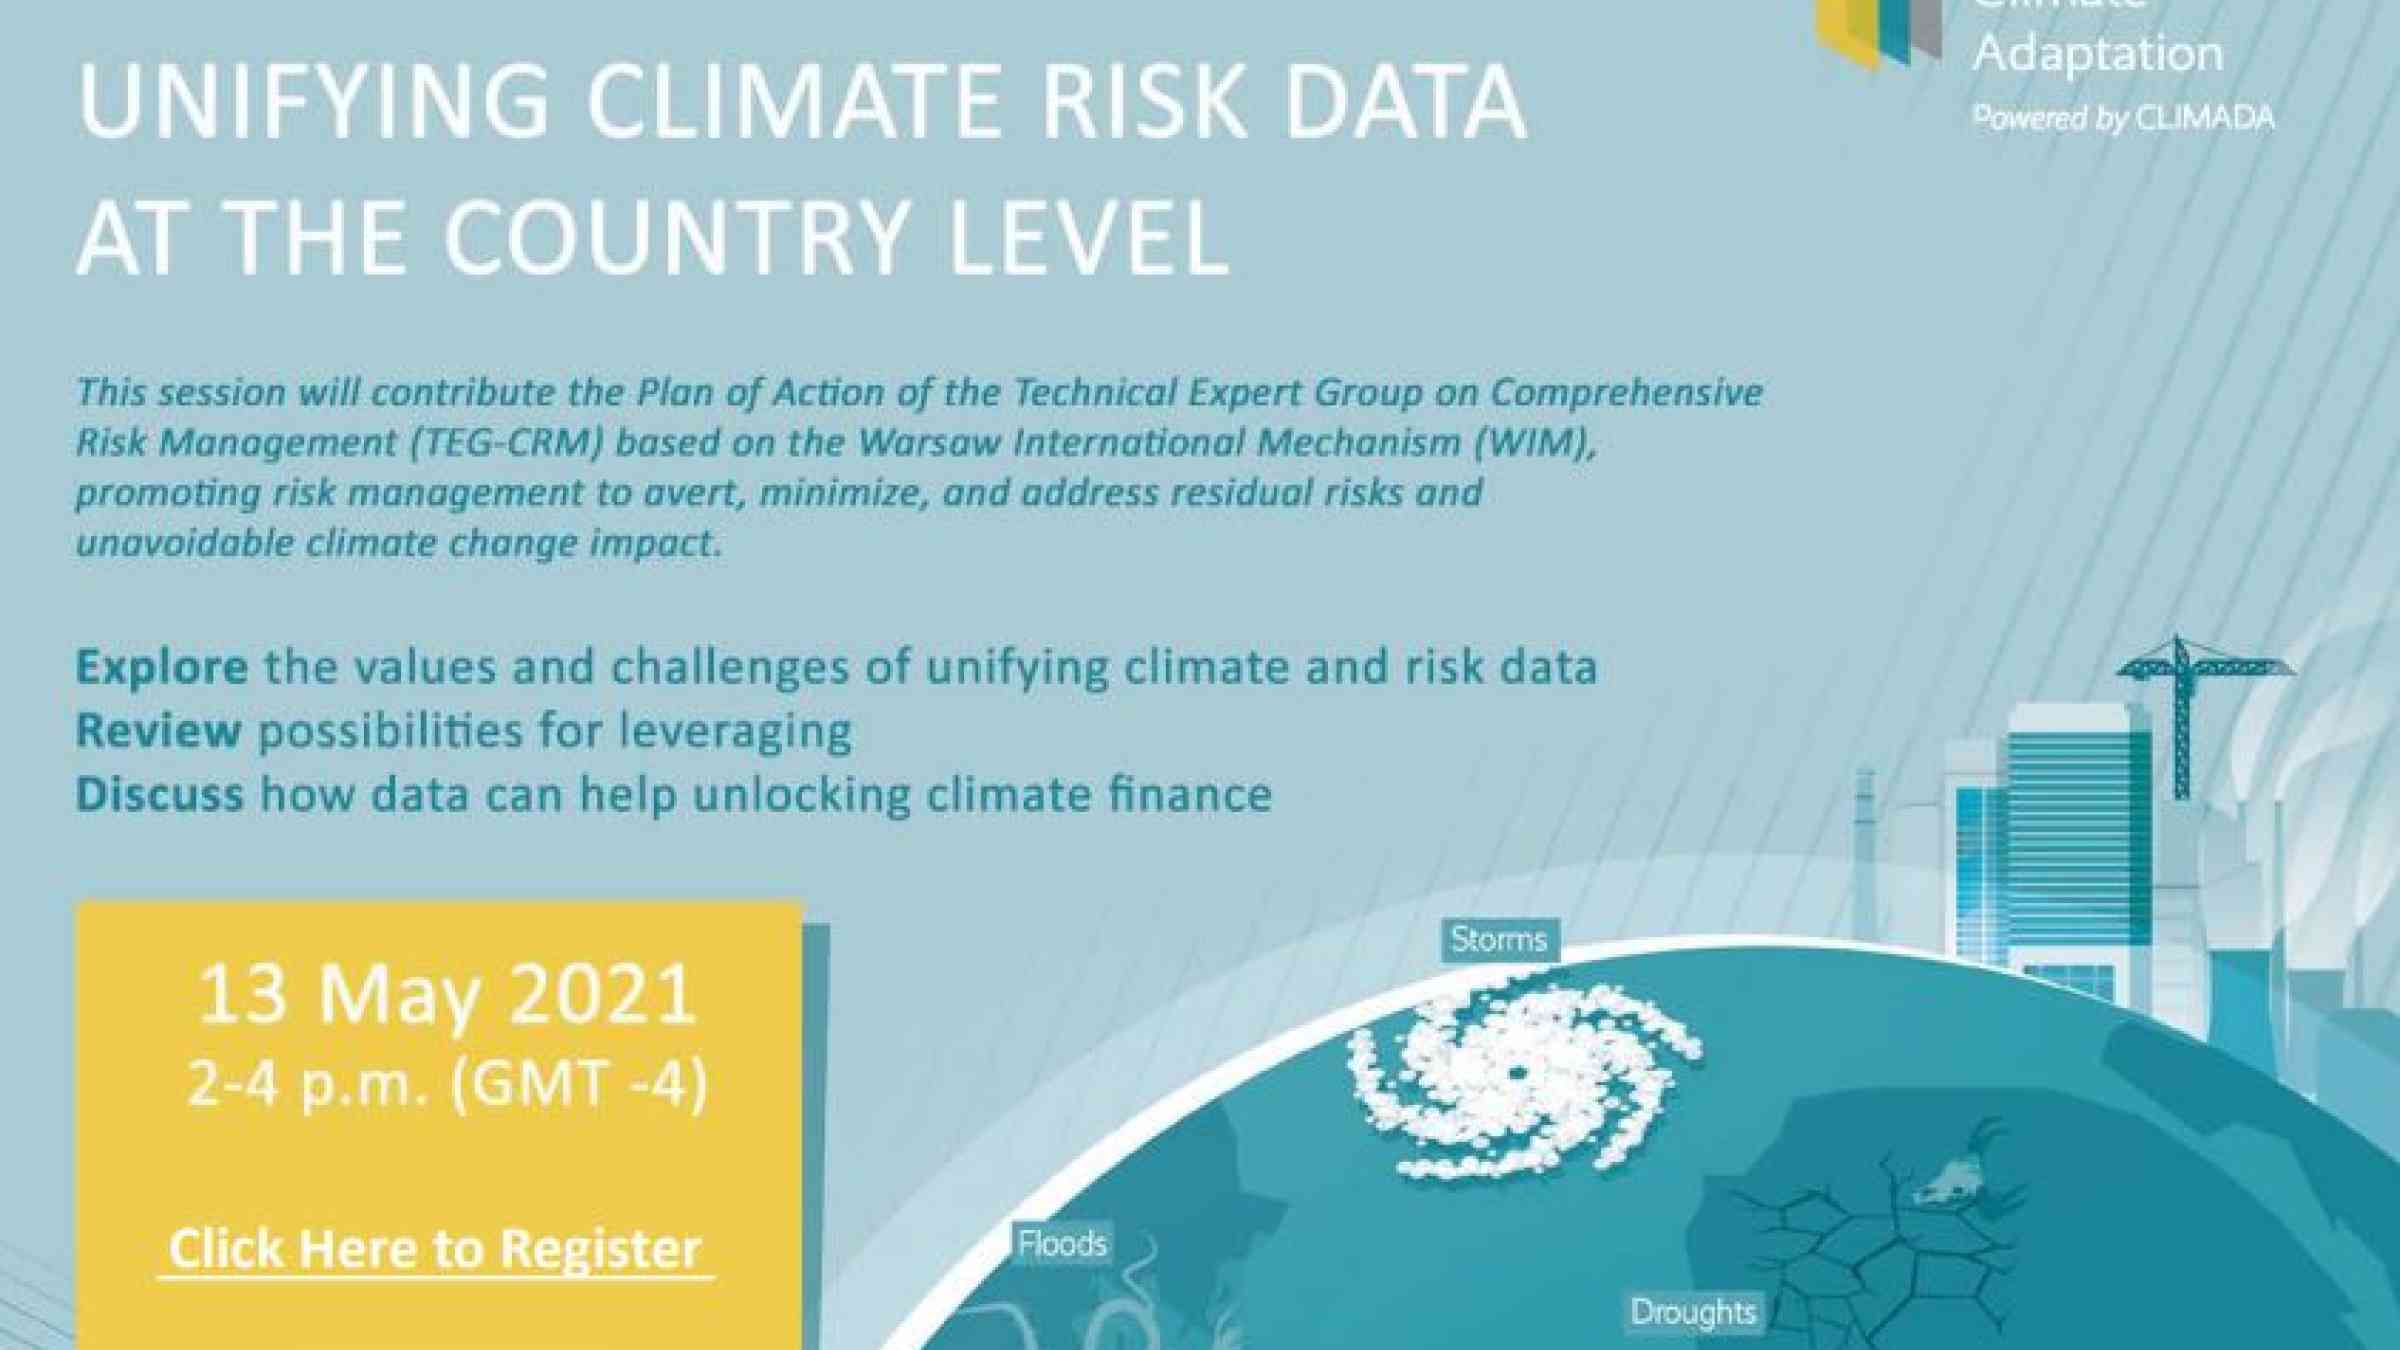 UNDRR ROAMC: Unifying climate risk data at the country level | UNDRR